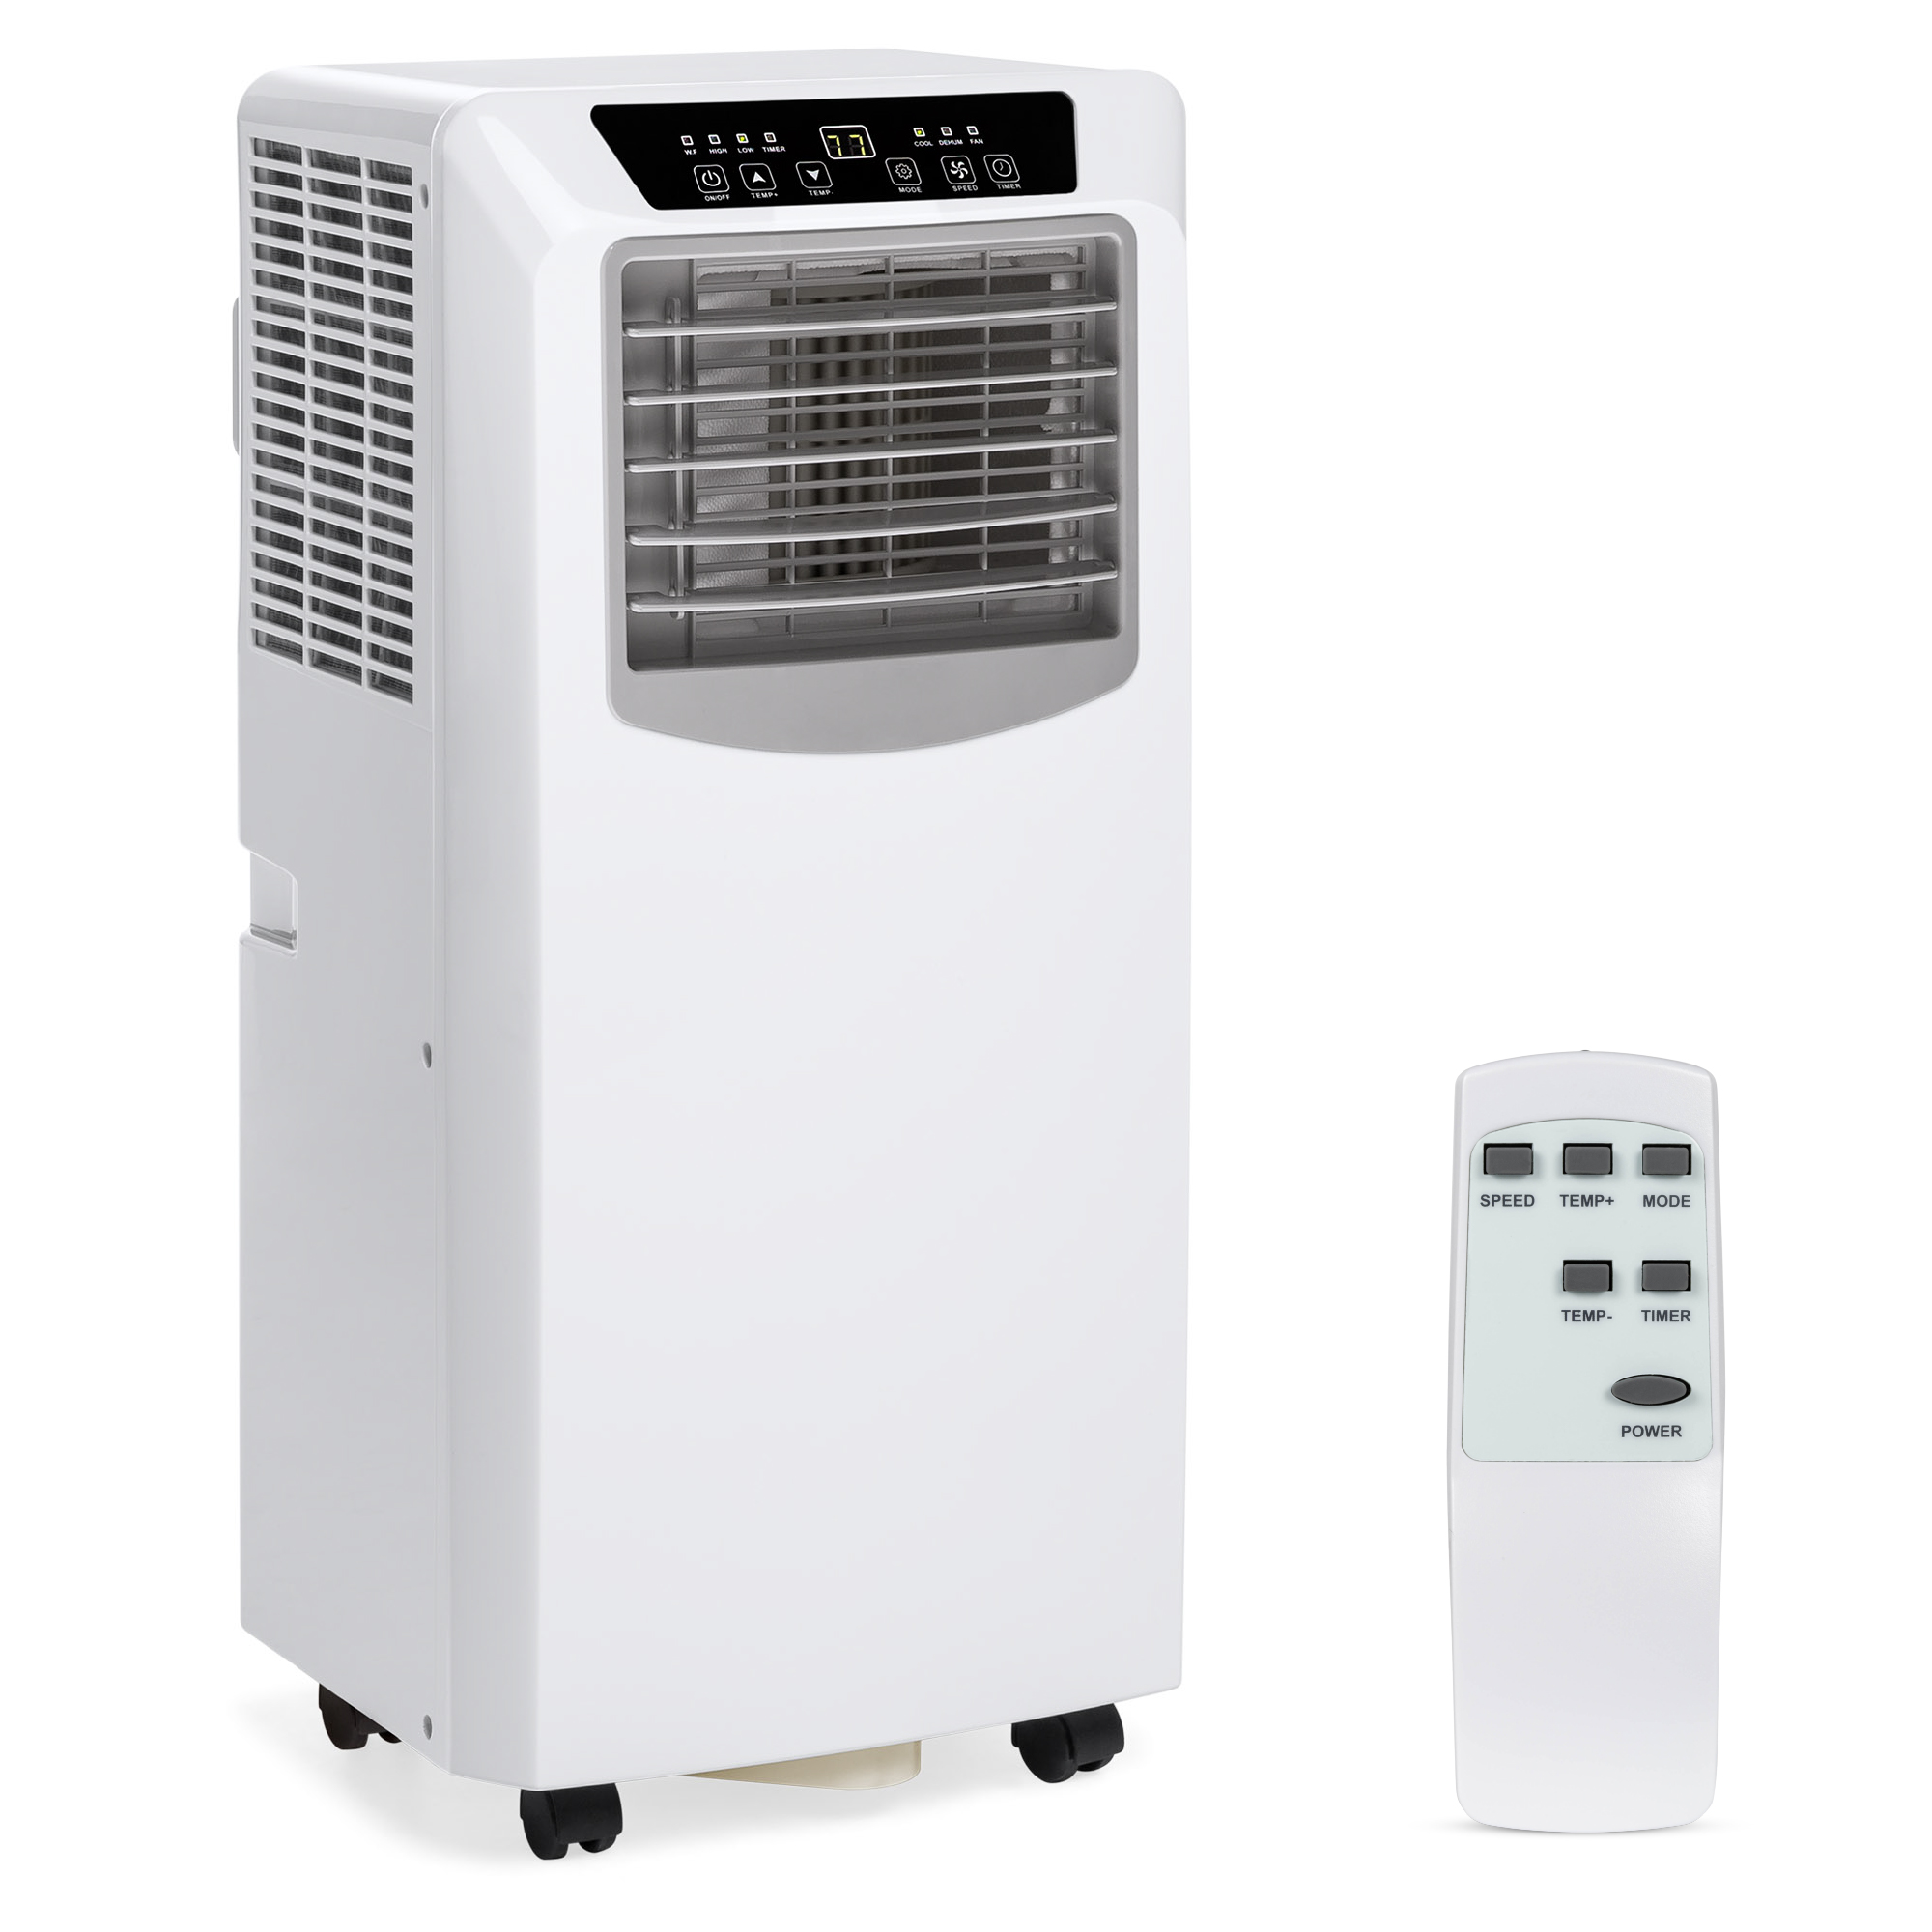 Best Choice Products 10,000 BTU 3-in-1 Air Conditioner Cooling Fan Dehumidifier w/ Remote Control, 200 SqFt Capacity - image 1 of 7